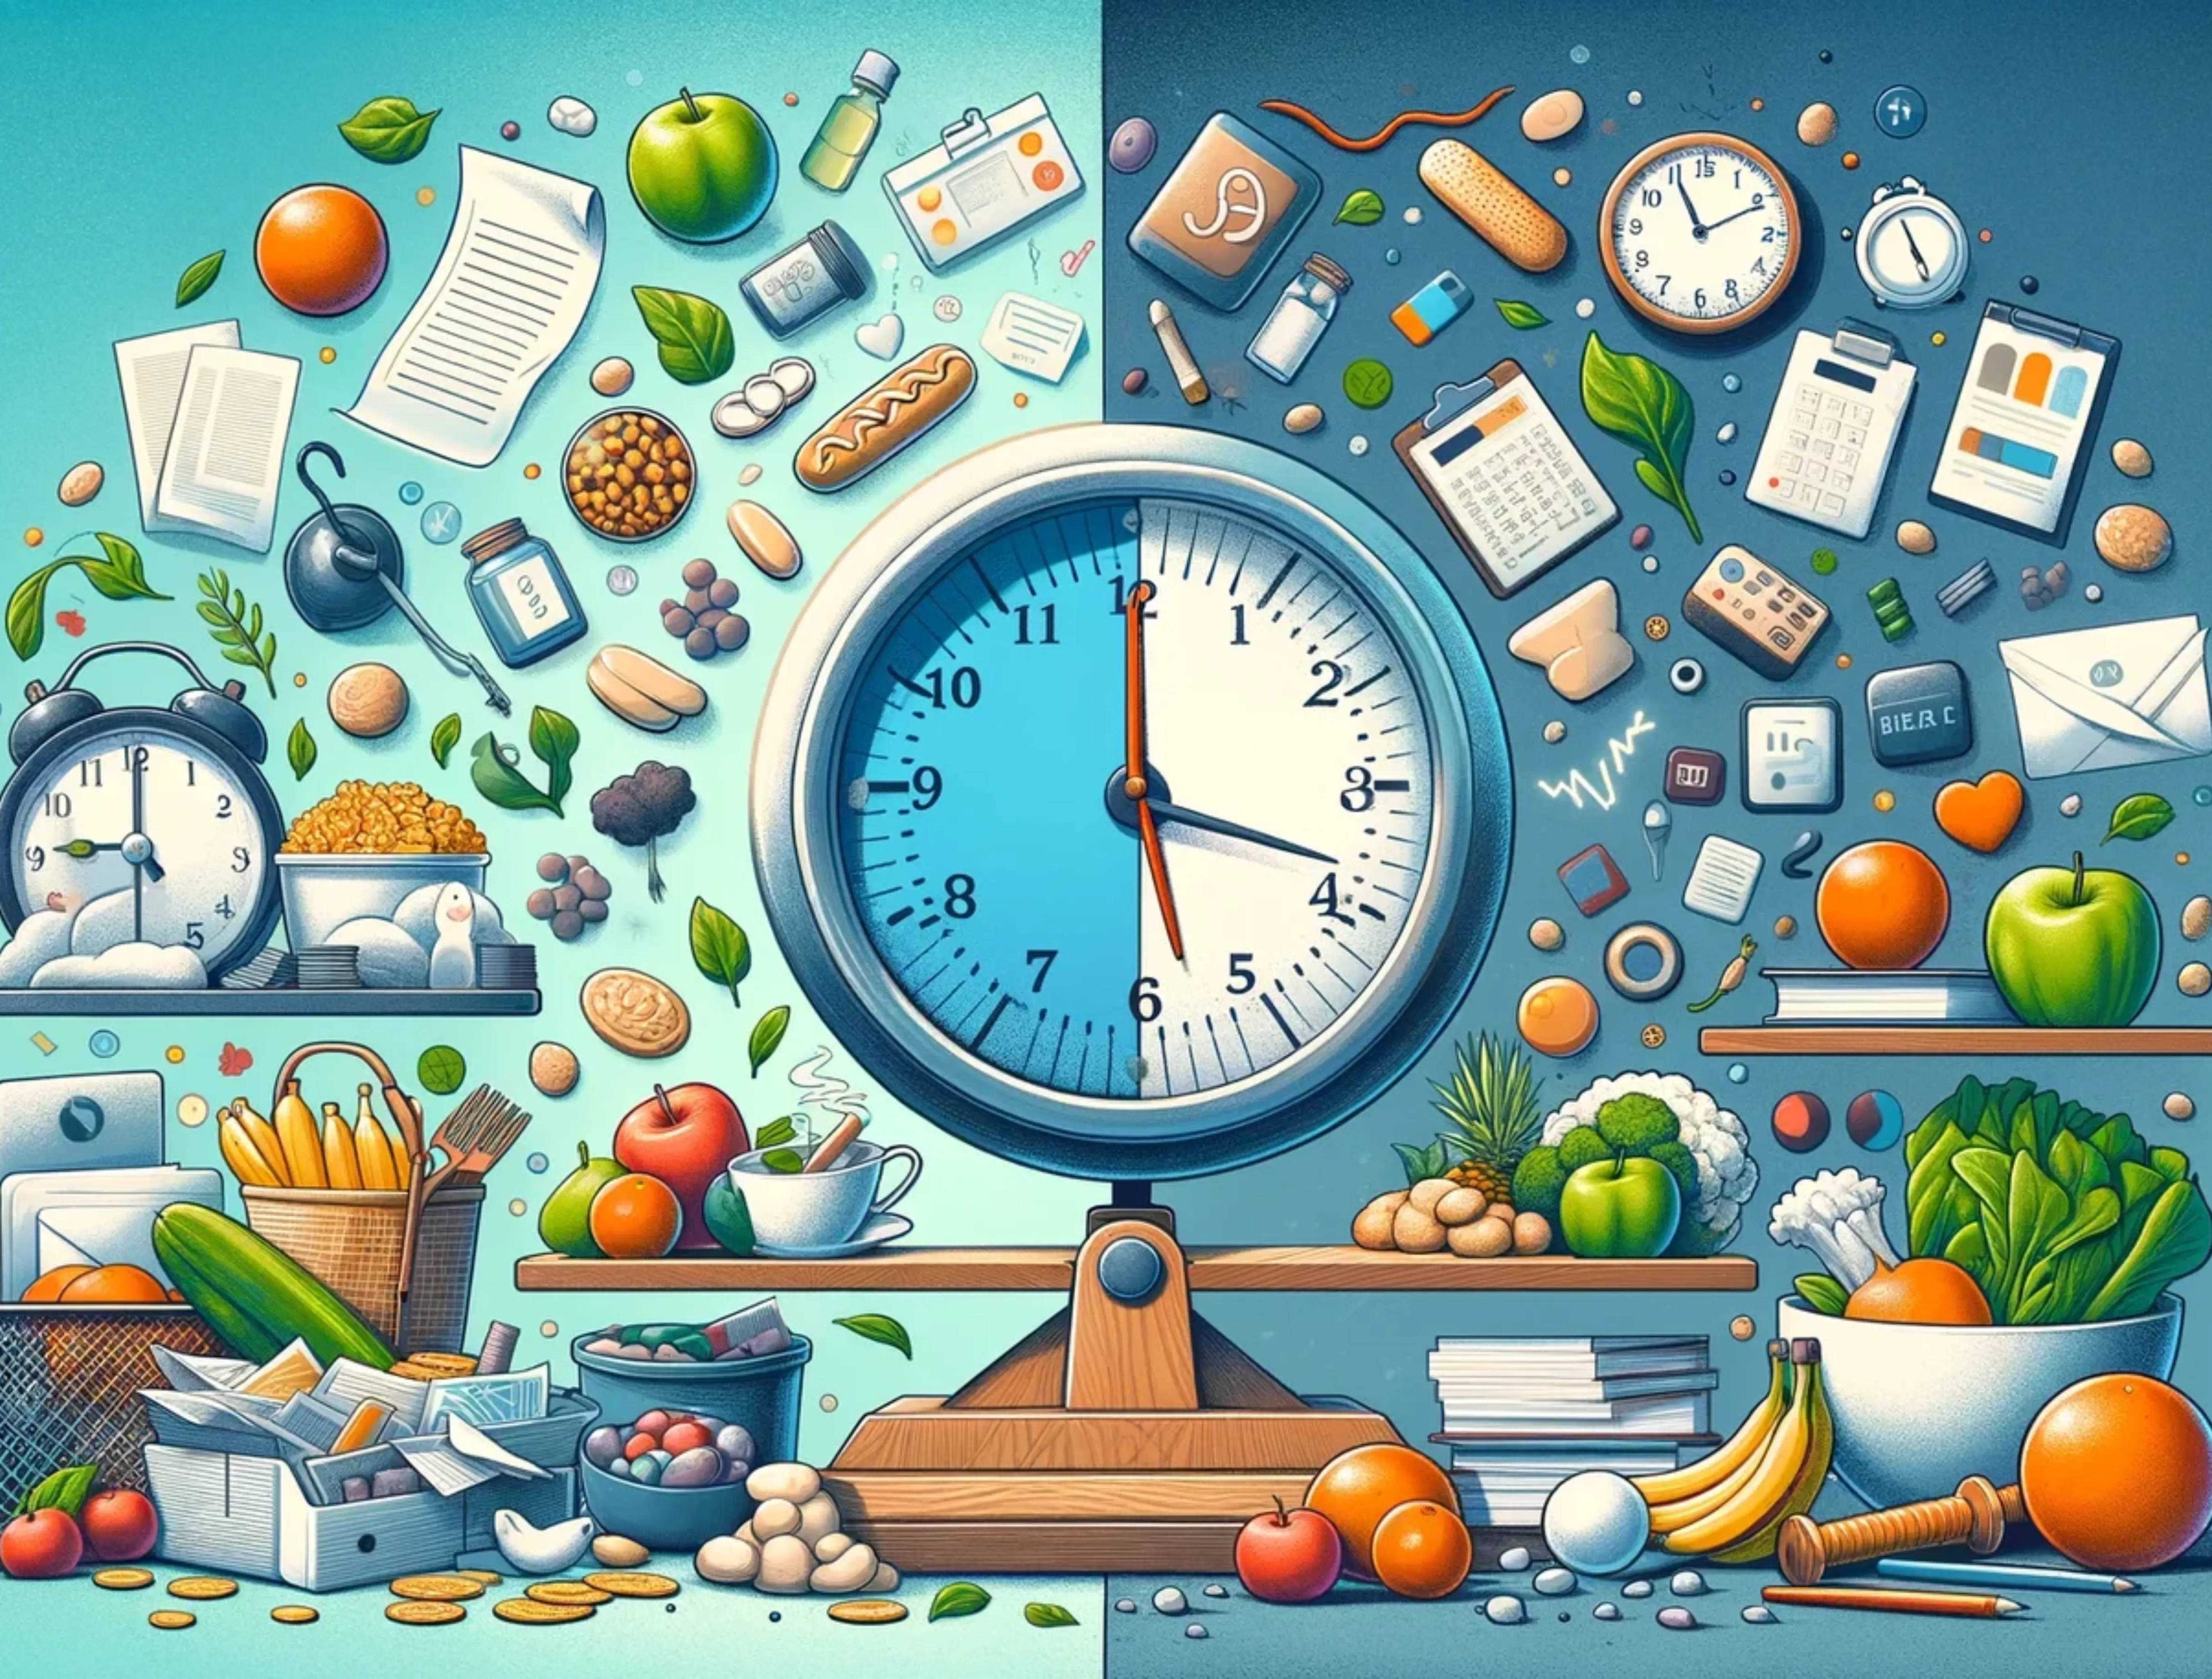 Image of a clocks, scales, foods, notes